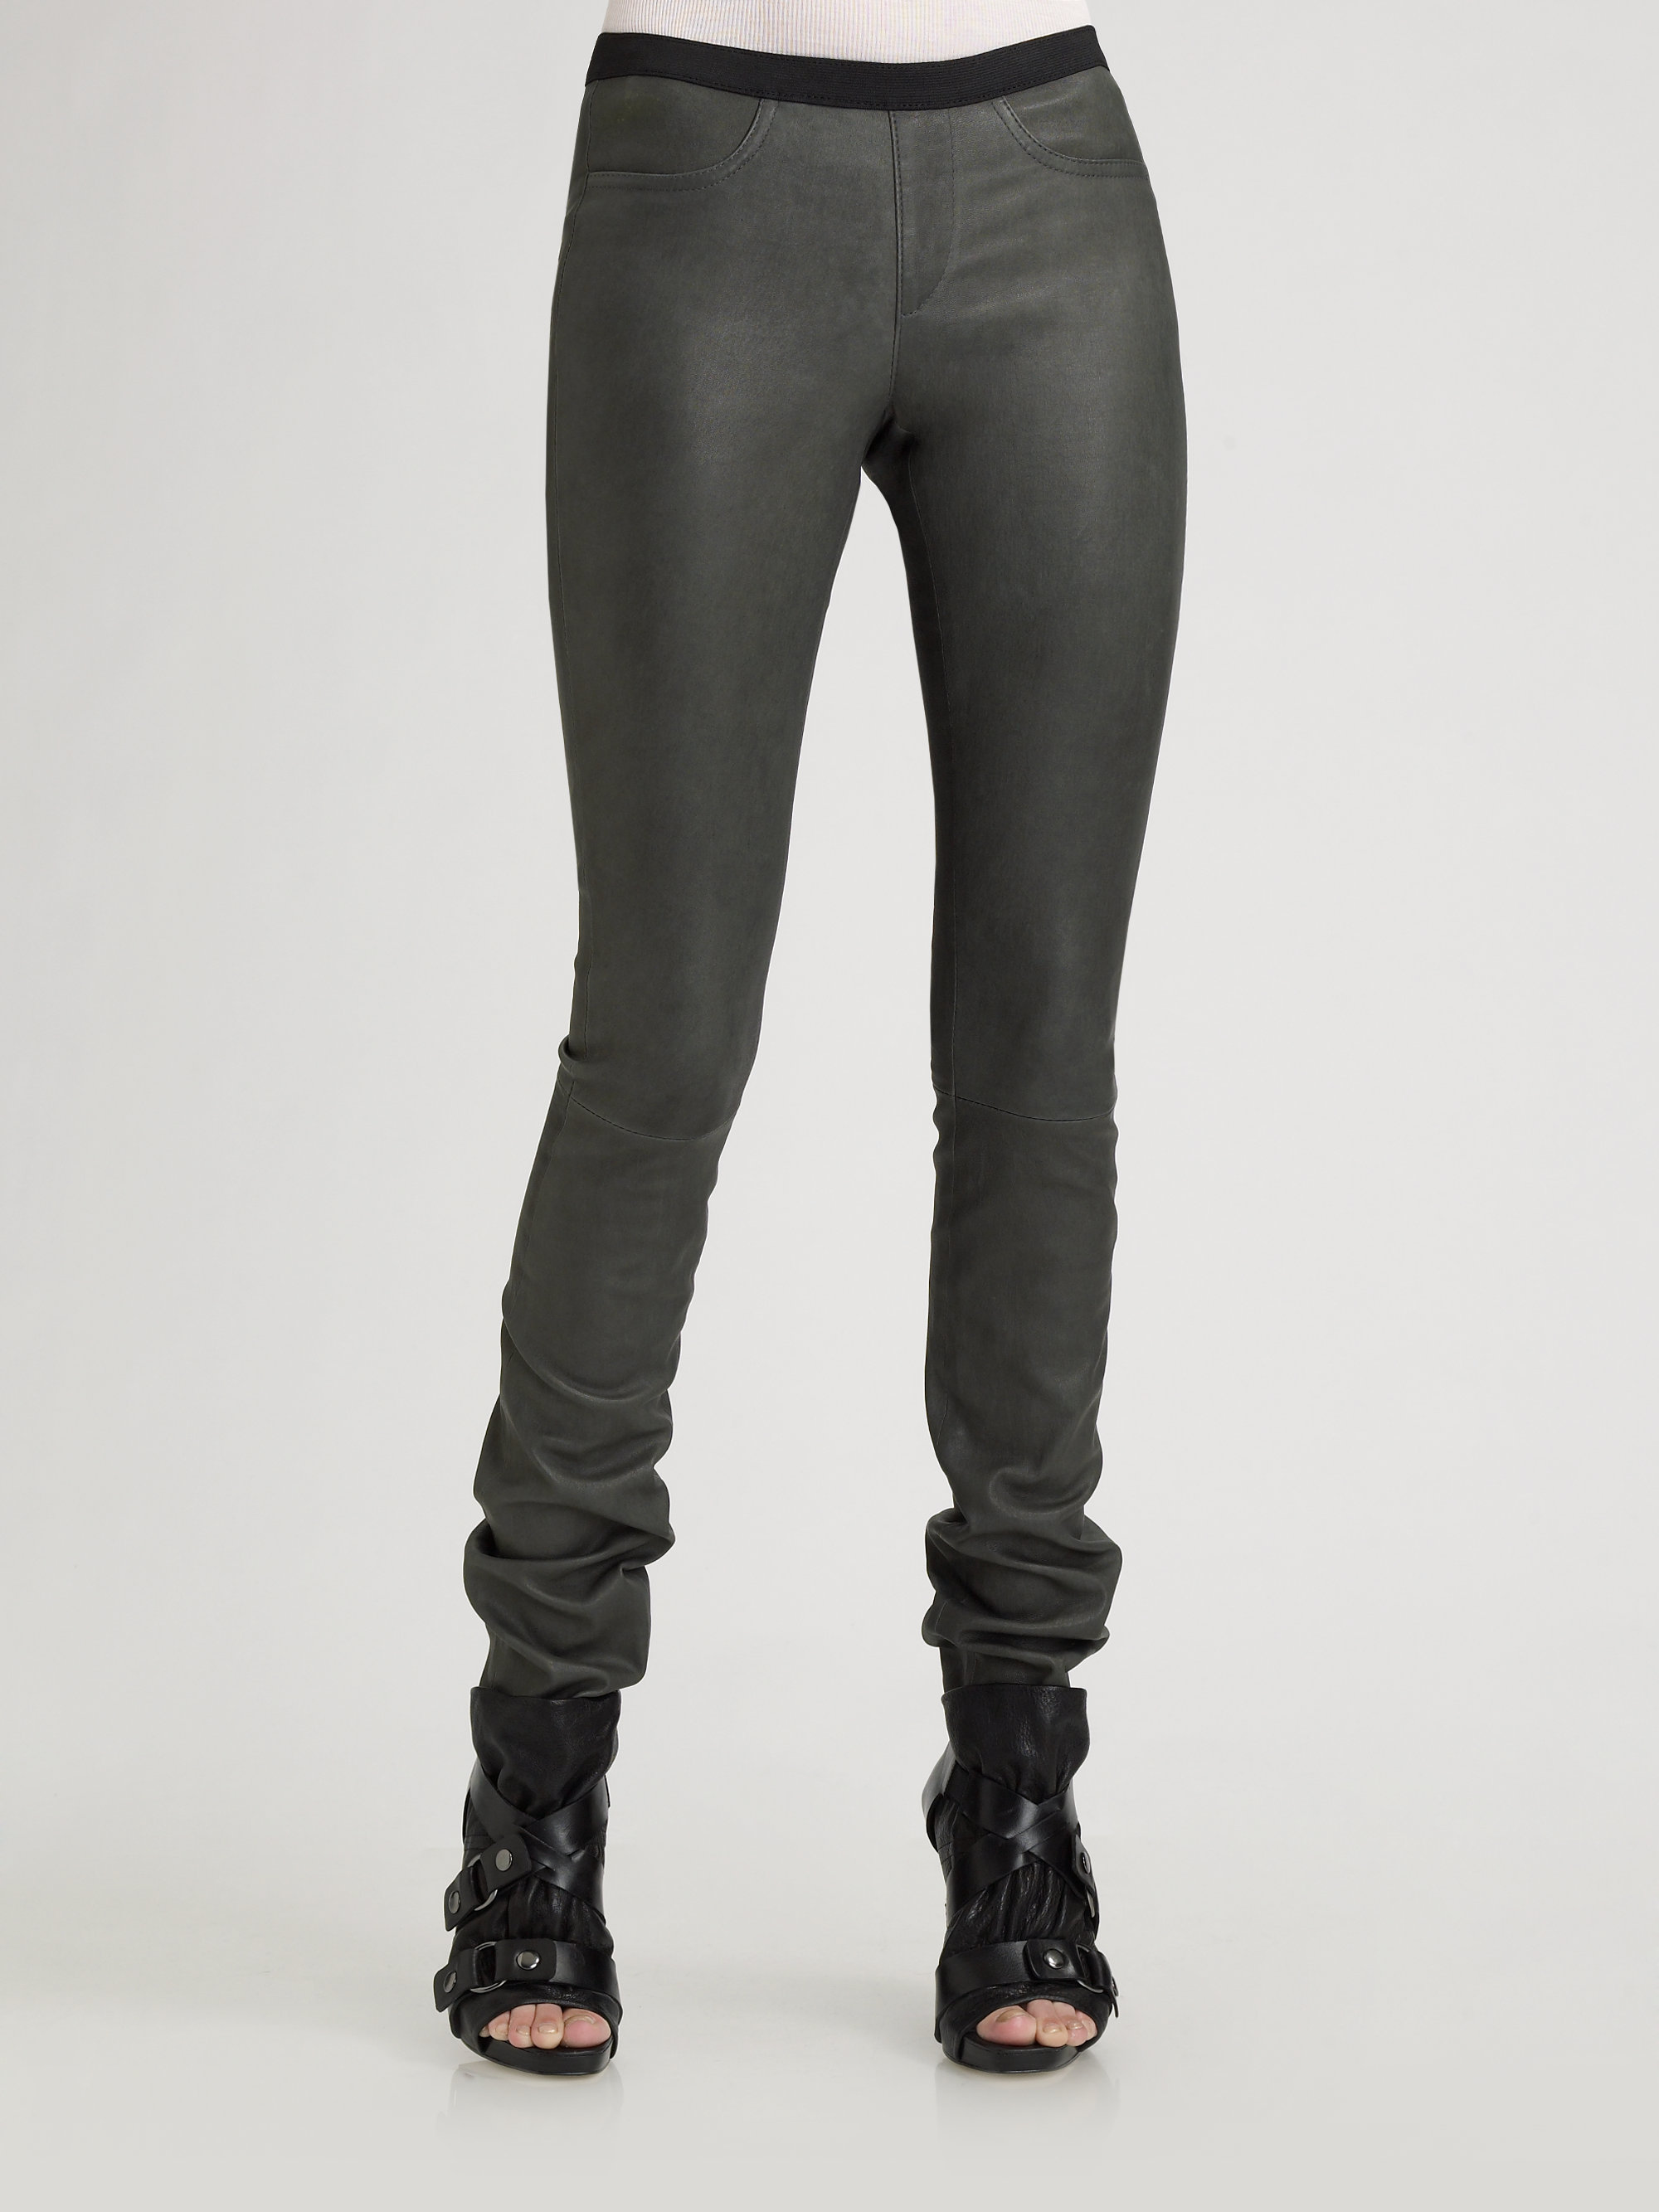 Helmut Lang Stretch Leather Leggings in Grey (Gray) - Lyst